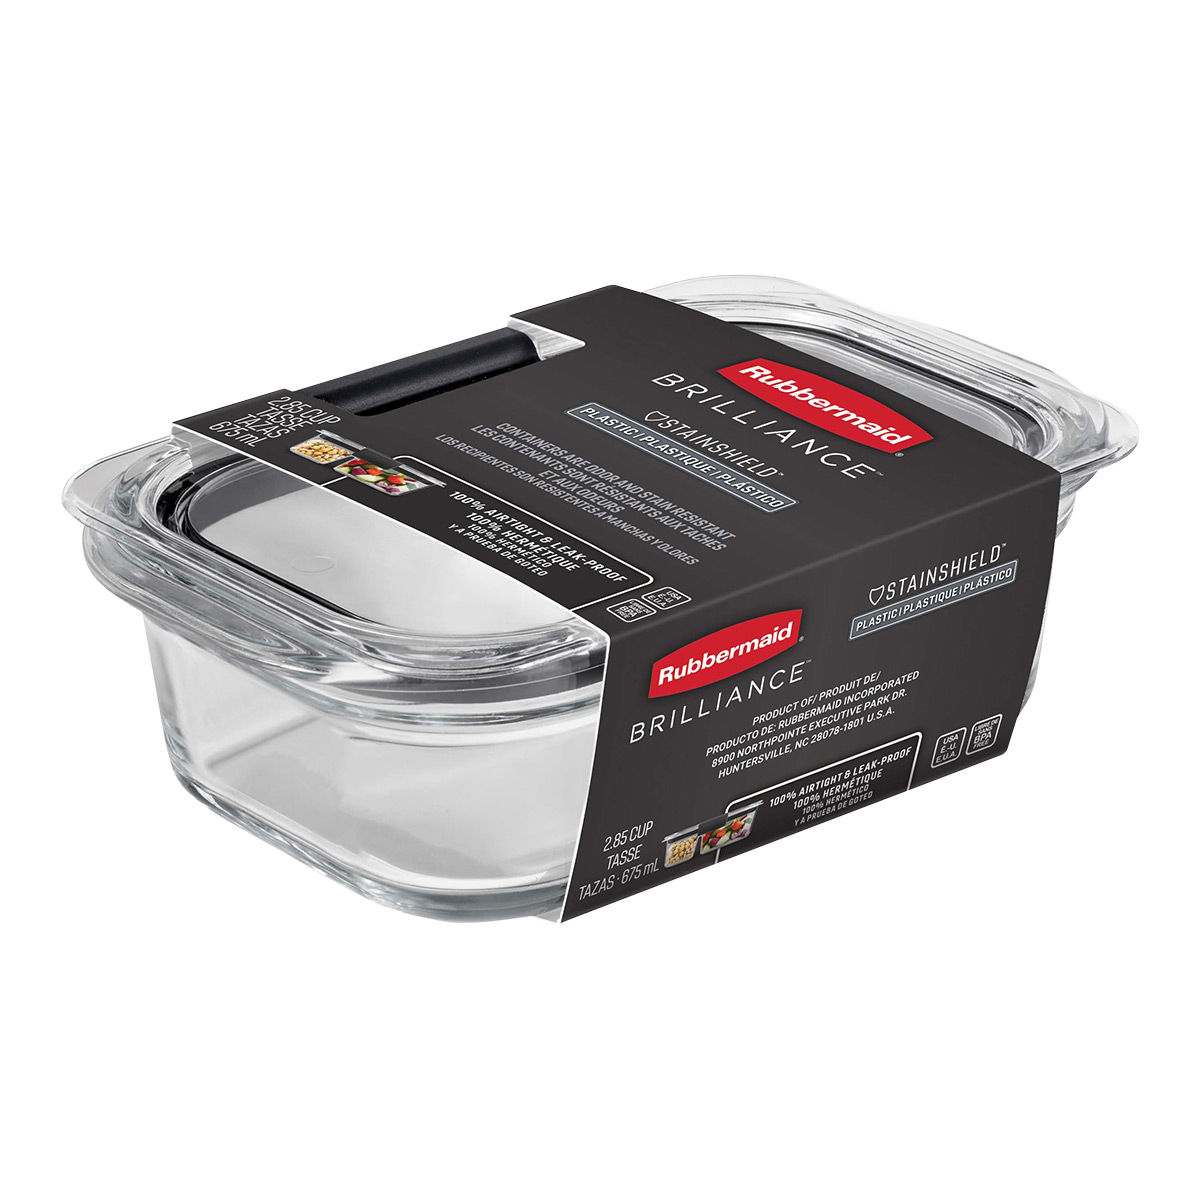 Rubbermaid on Instagram: Meal prep for the win! 🏆🍱 With these Rubbermaid  Brilliance containers, you're set for a week of healthy and hassle-free  meals 🌟 No more stress or time wasted on